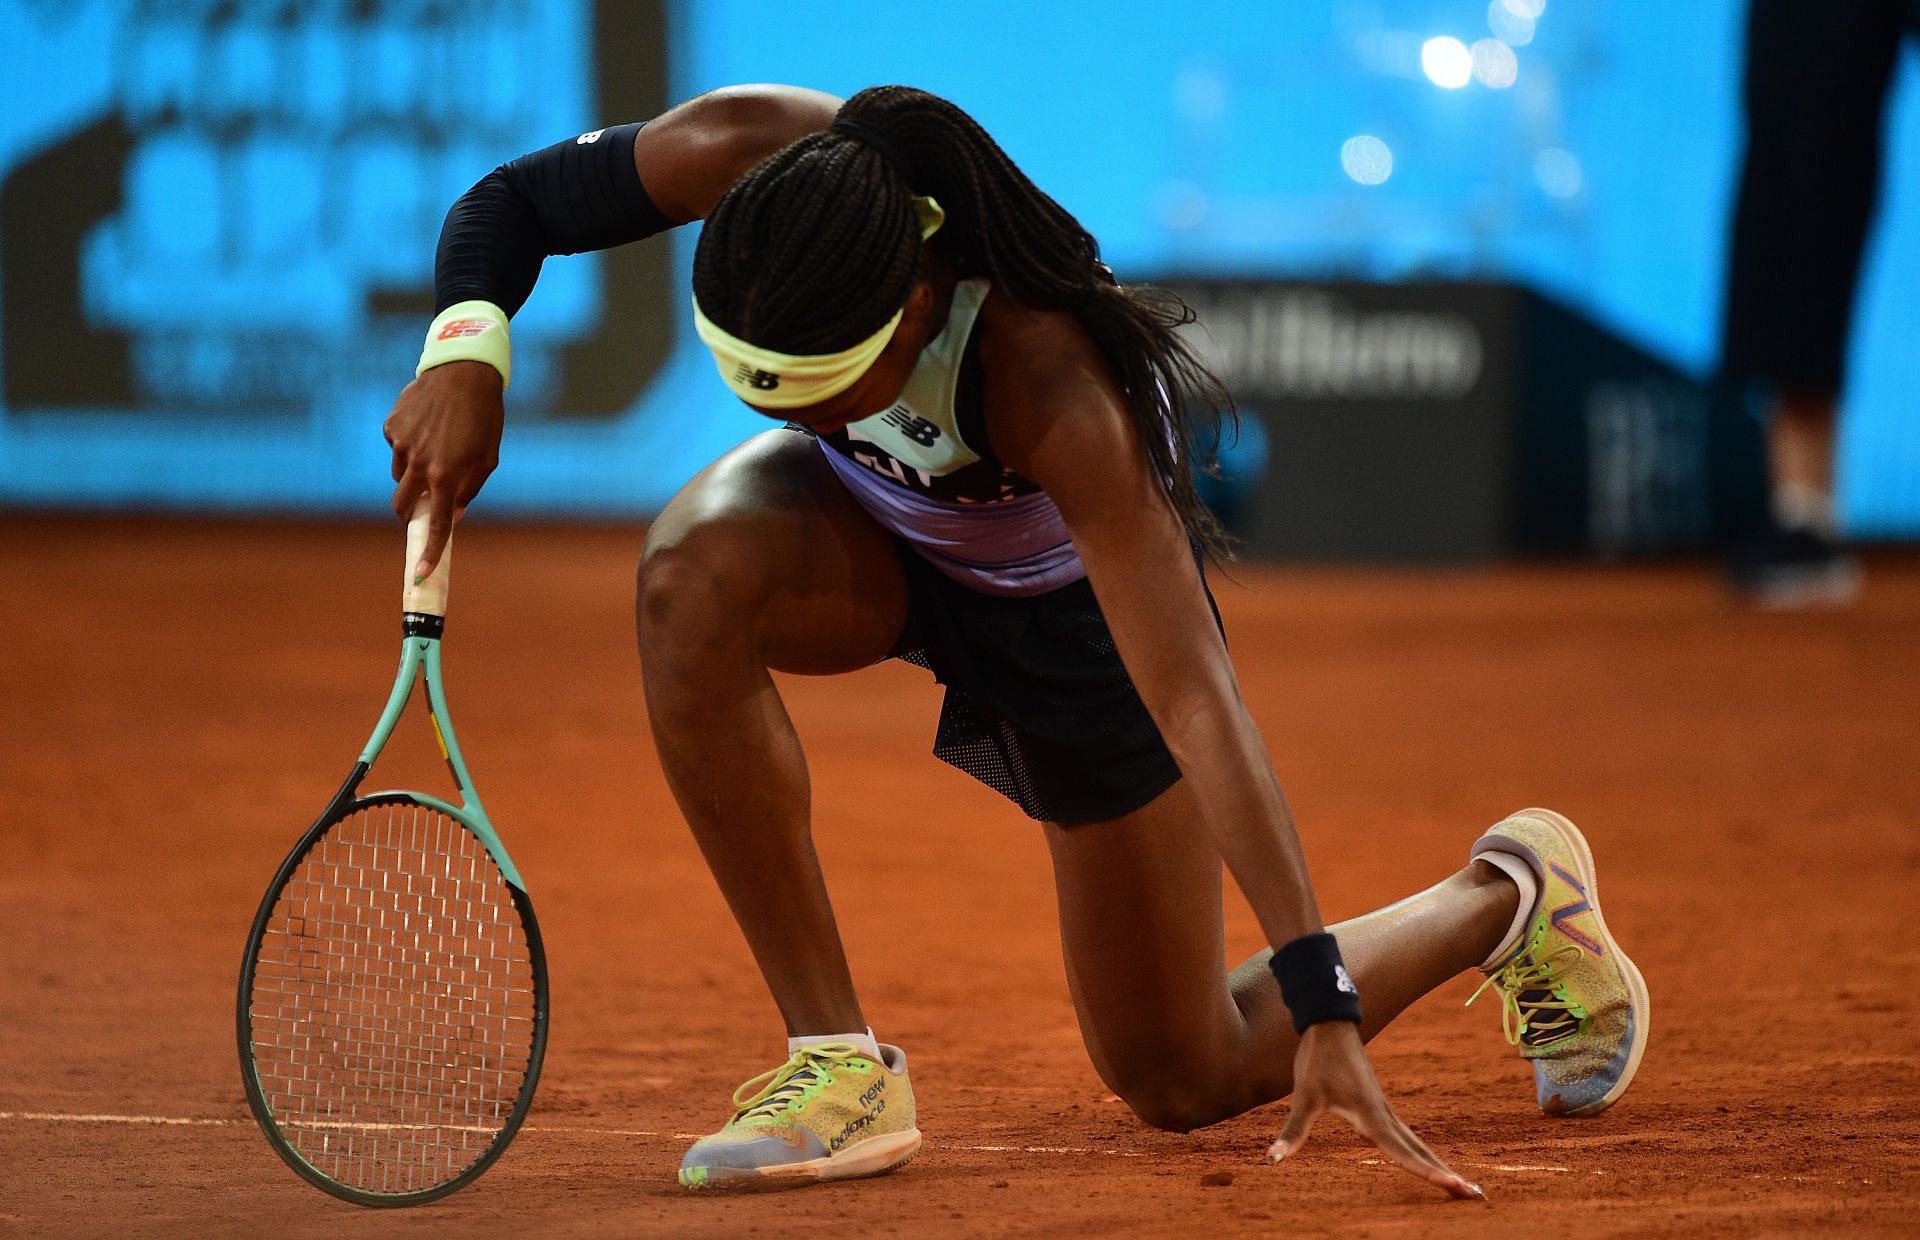 Coco Gauff disappointed during the match